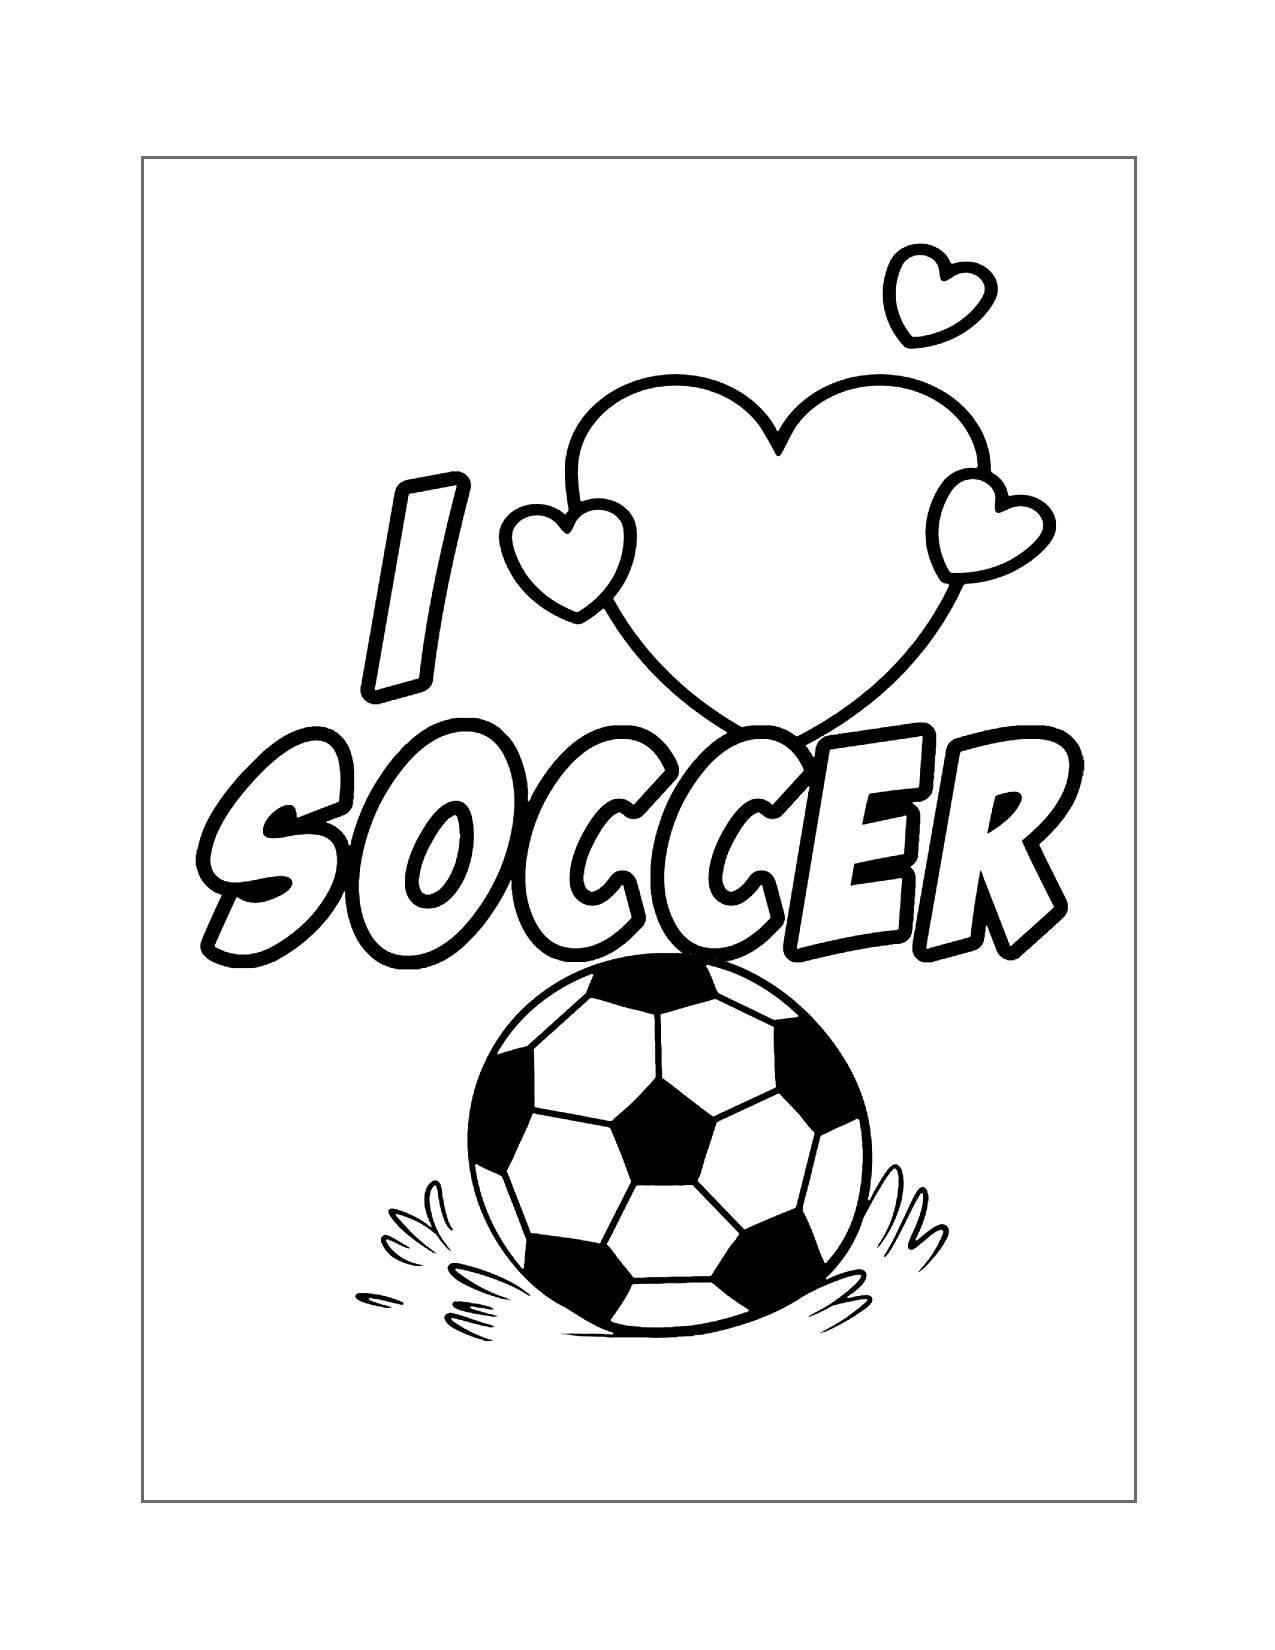 I Love Soccer Coloring Page